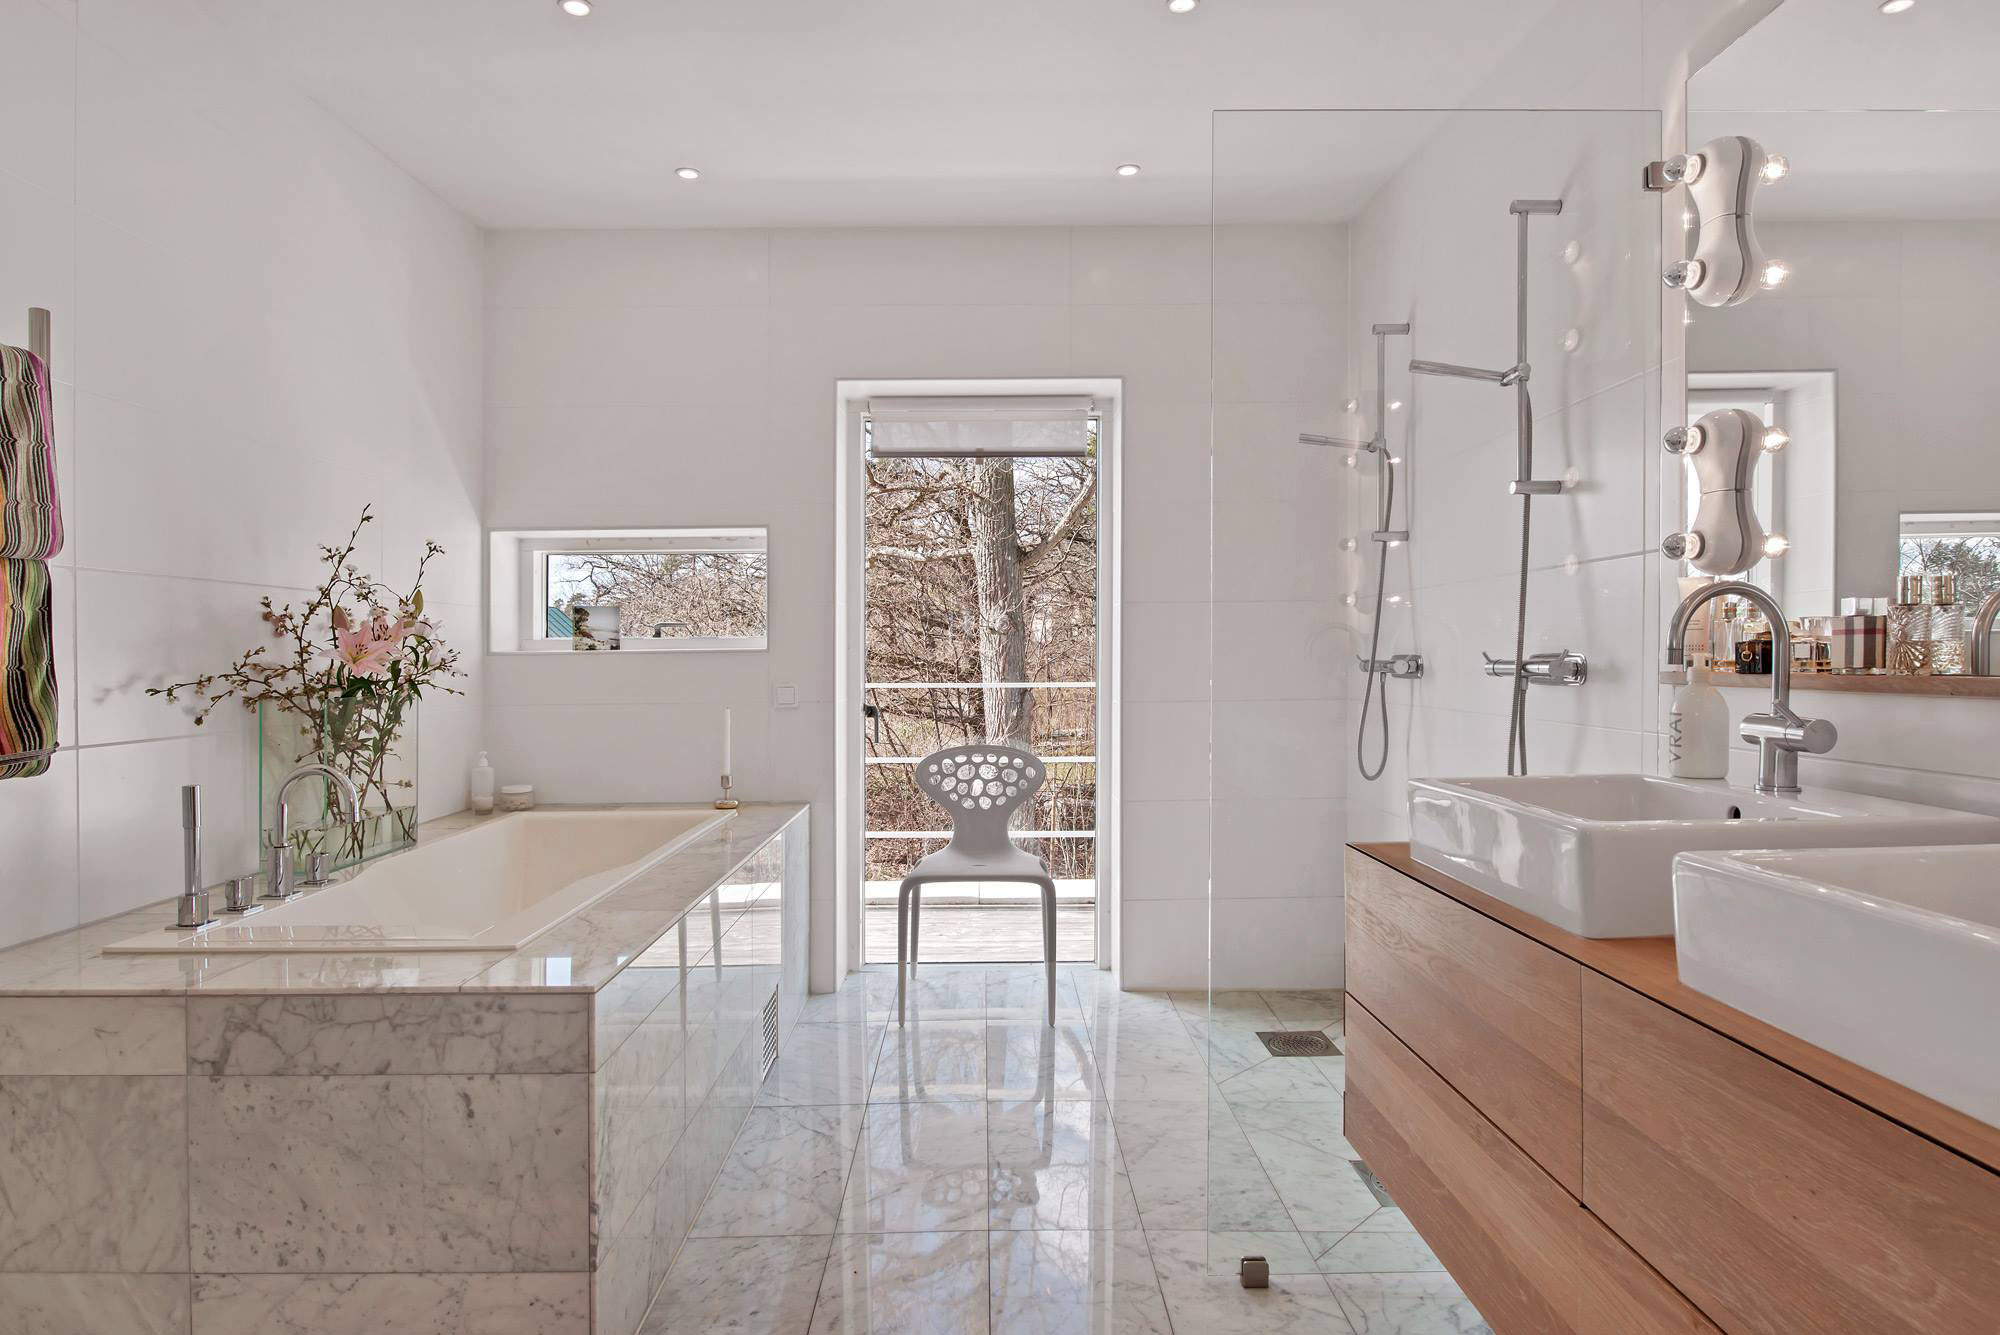 White Modern Stockholm Luxurious White Modern Villa Near Stockholm Bathroom Idea Featured With Marble Tub And Double Vanity Next To Shower Dream Homes  Stunningly Beautiful Villa Decorated In Modern Scandinavian Style